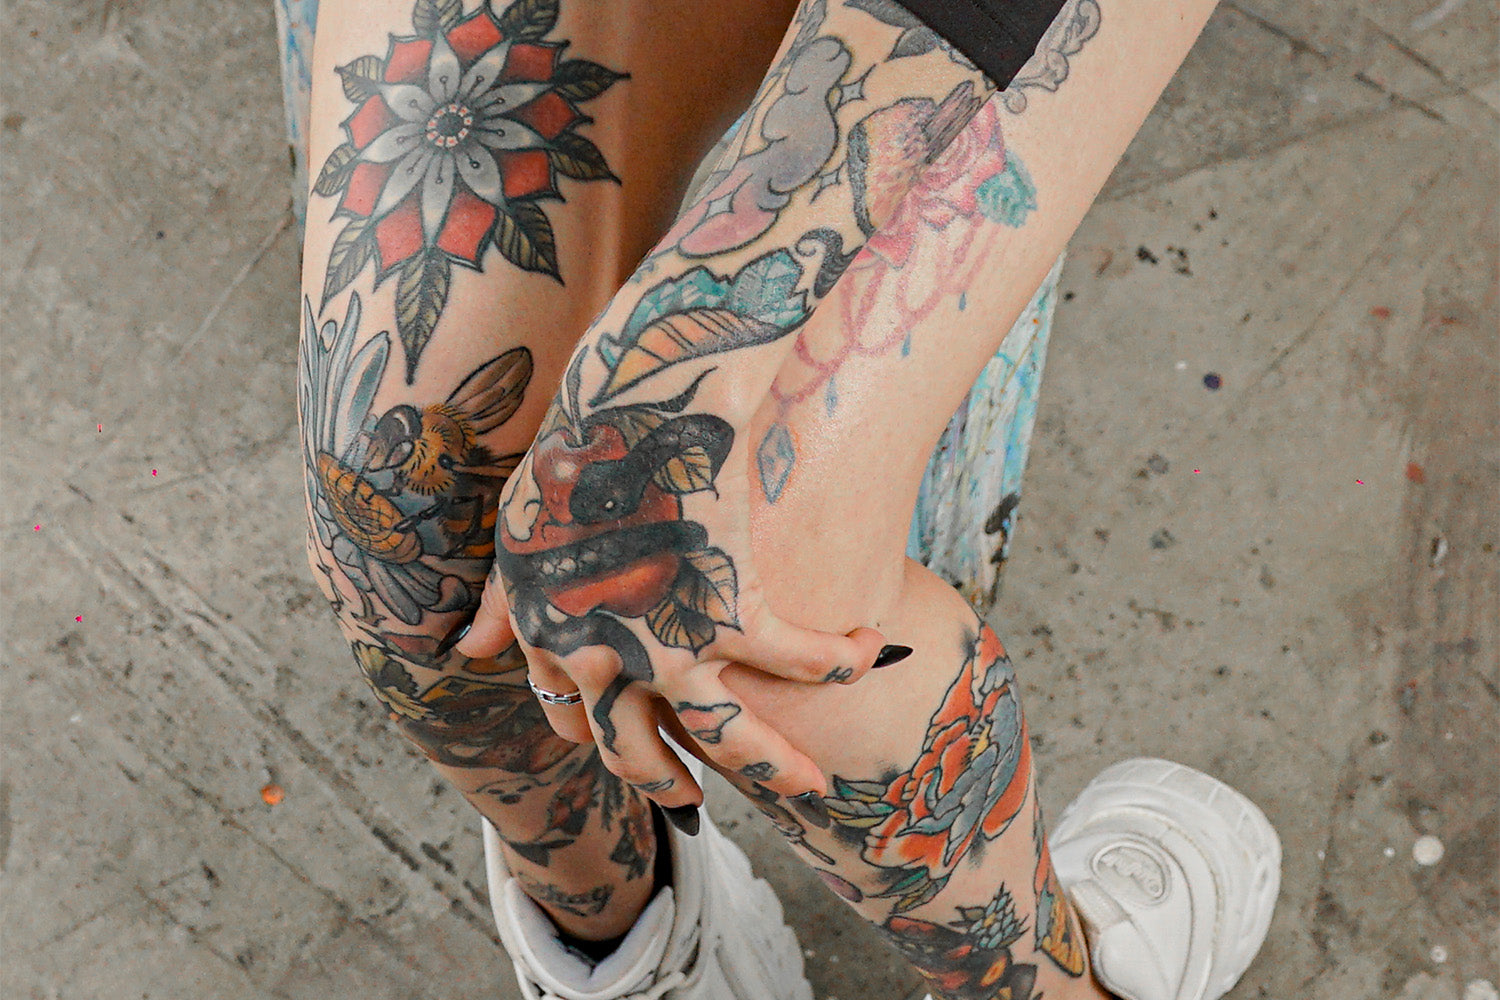 How long does it take to get a full sleeve tattoo? - Quora